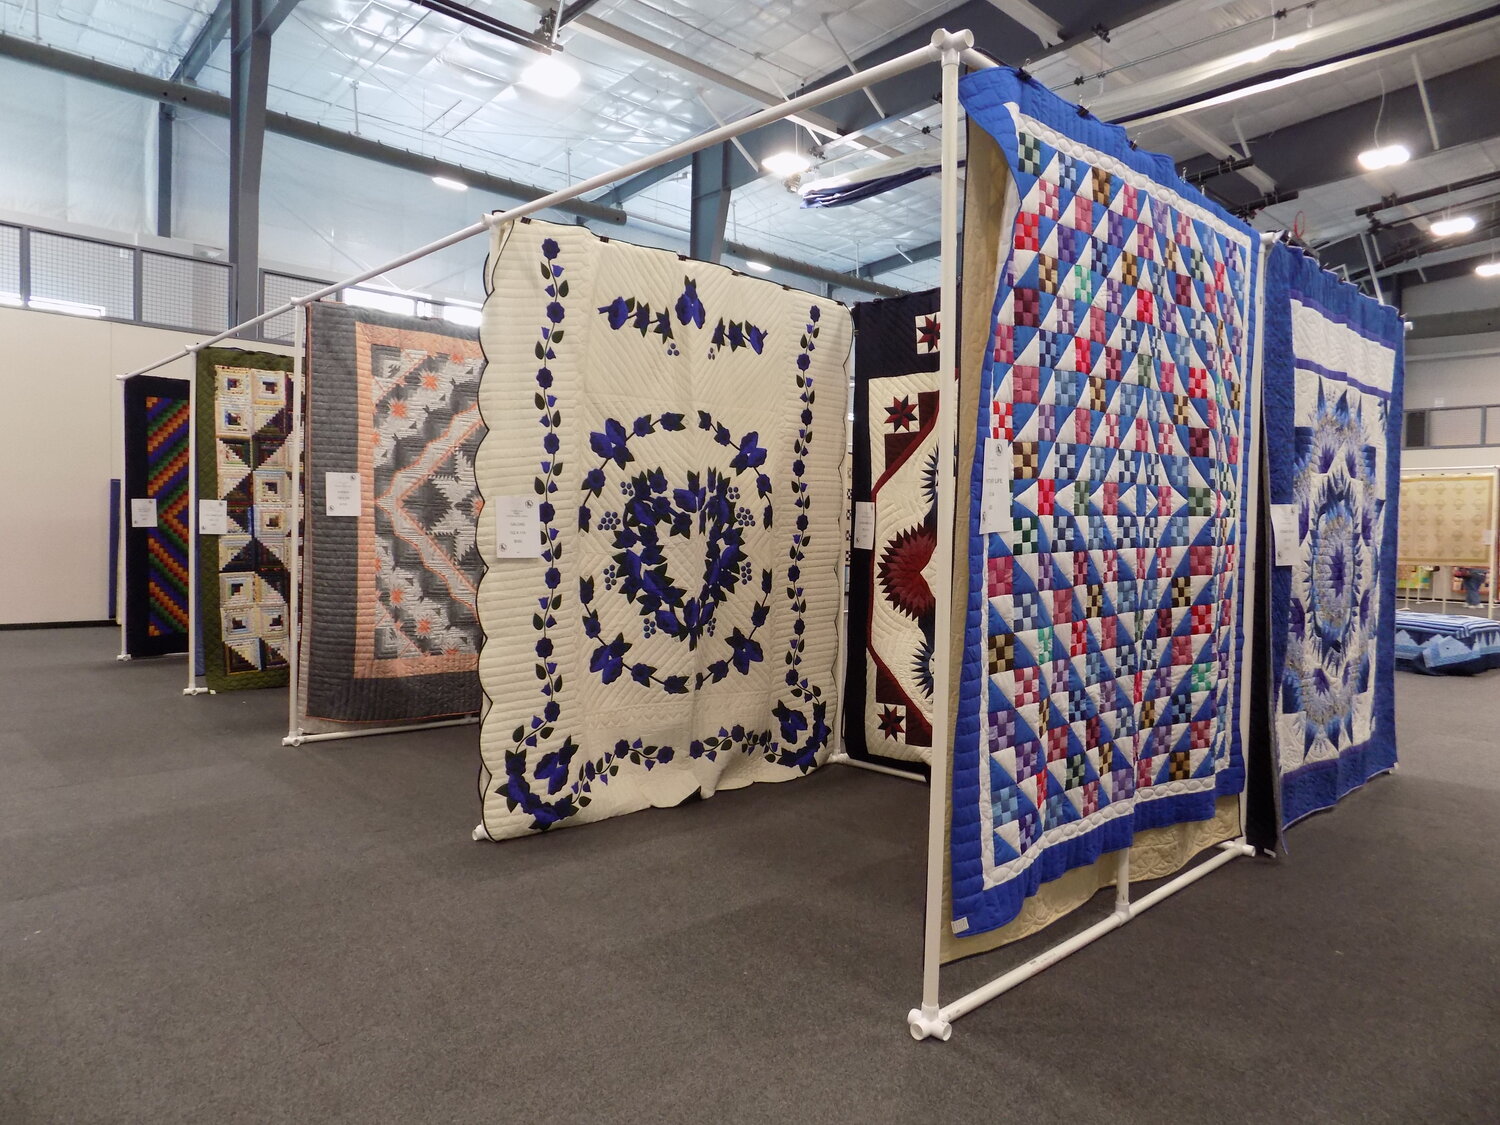 There was a quilt for everyone at the show and sale.  No one color or style dominates, according to Katie Karnes.